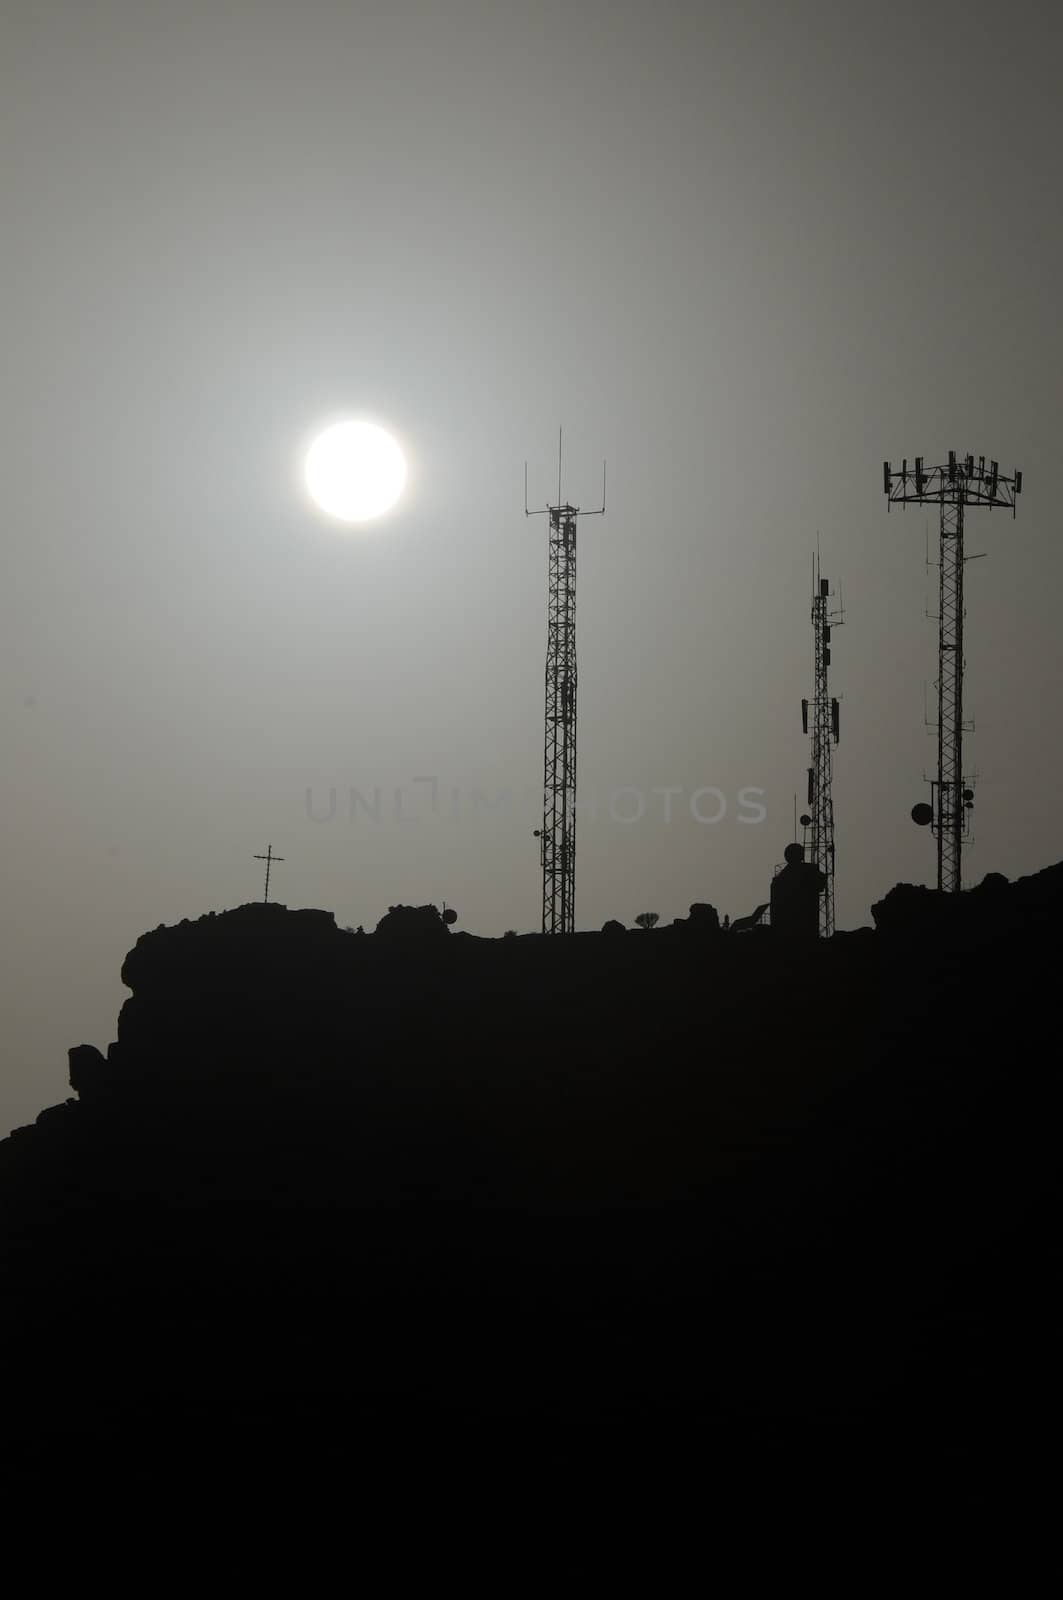 Some Silhouetted Antennas on the top of a Hill